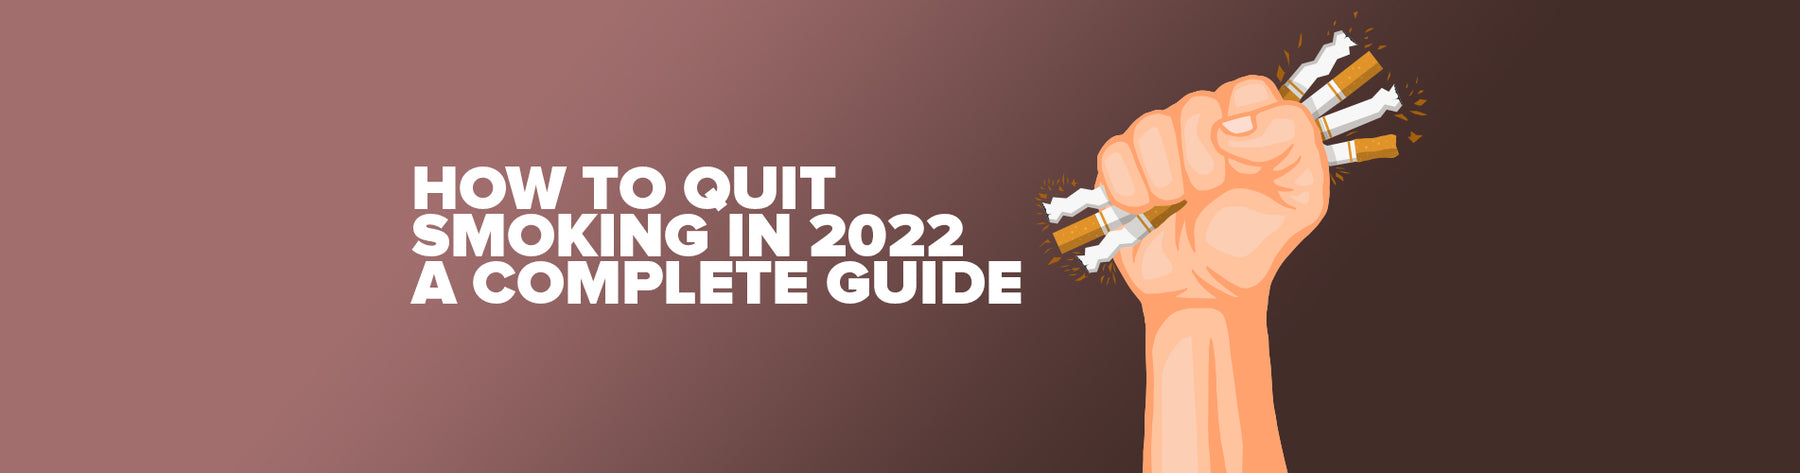 How To Quit Smoking In 2021 - A Complete Guide